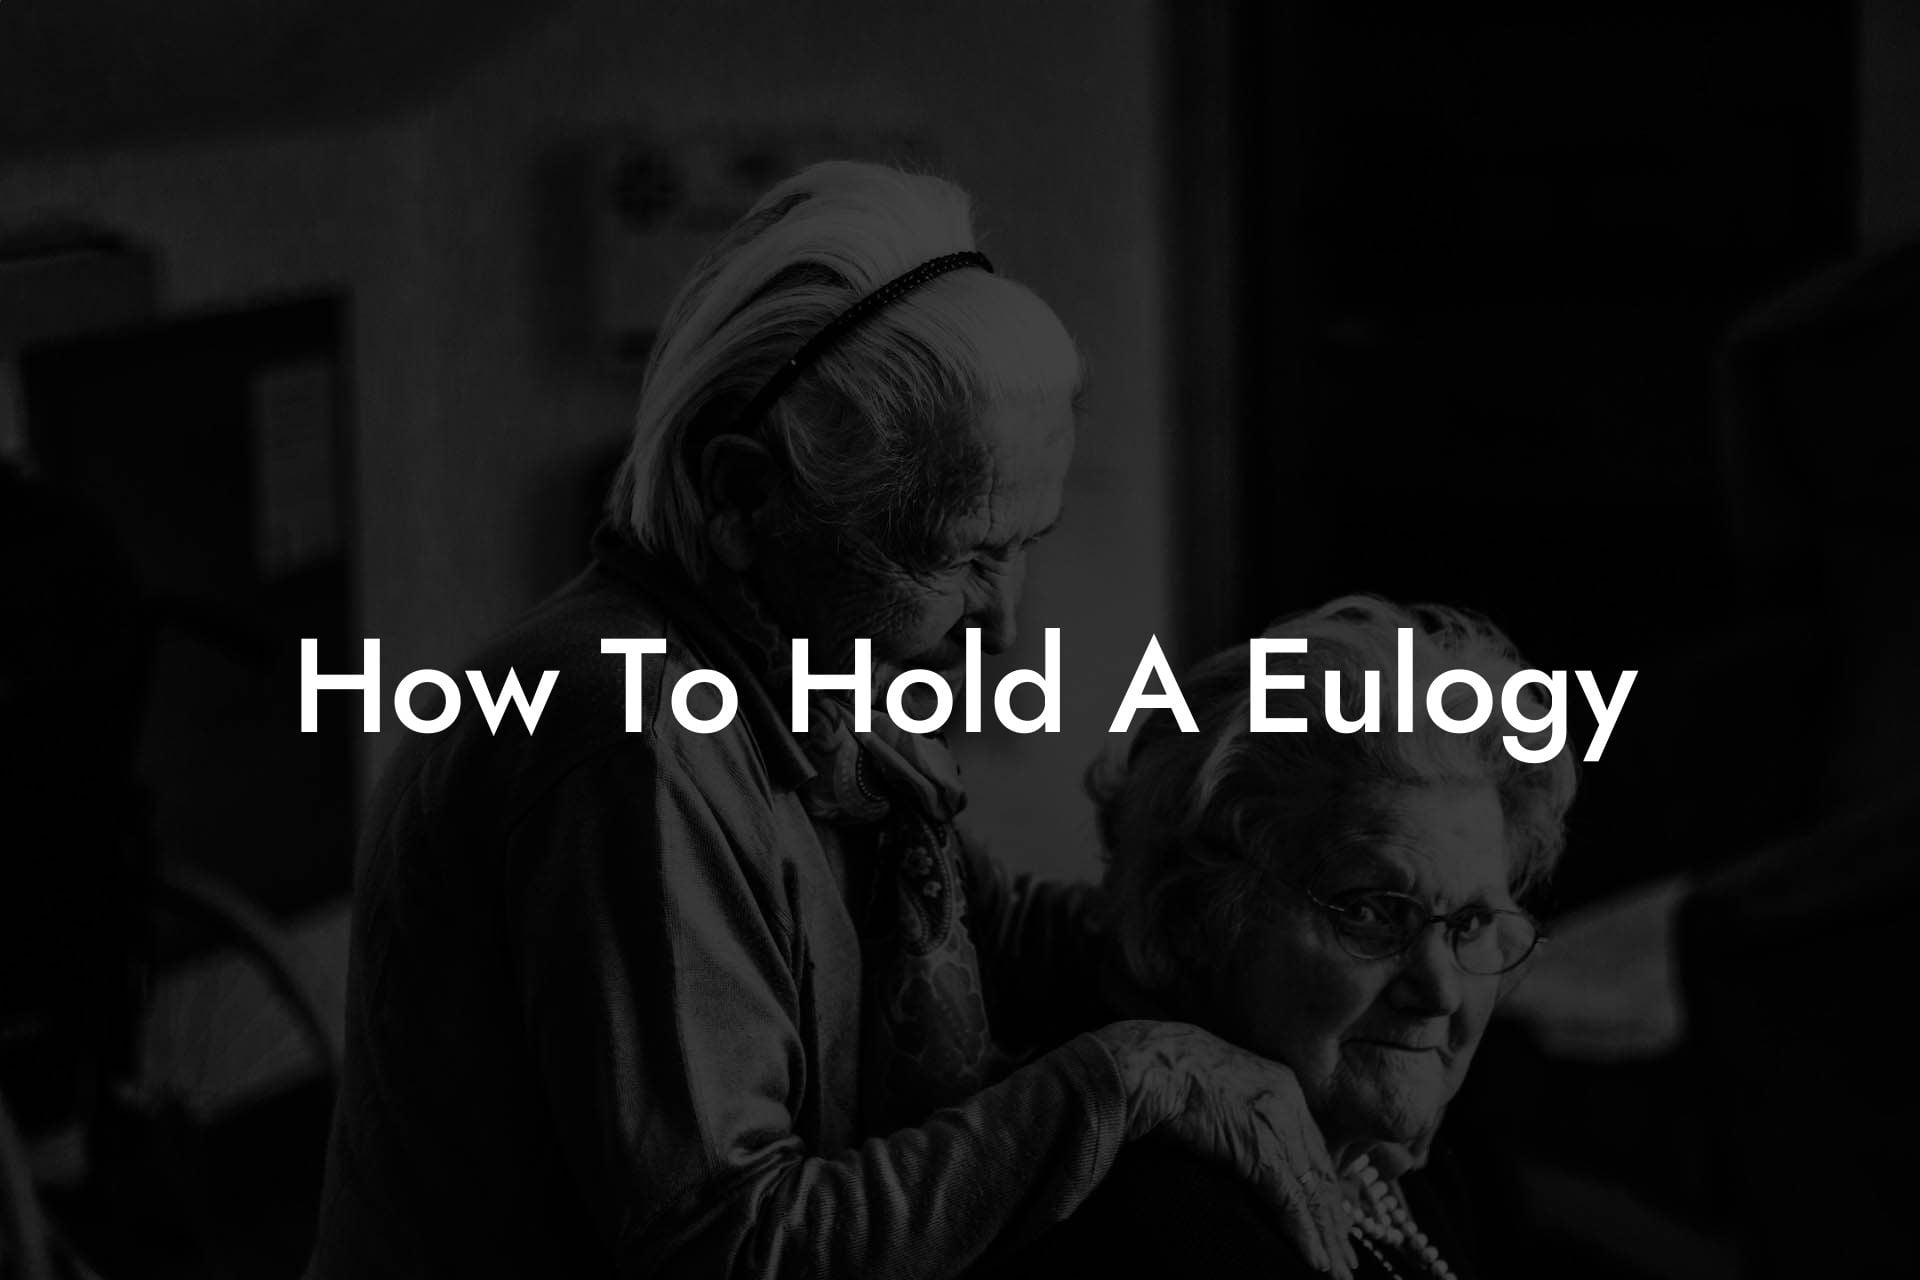 How To Hold A Eulogy